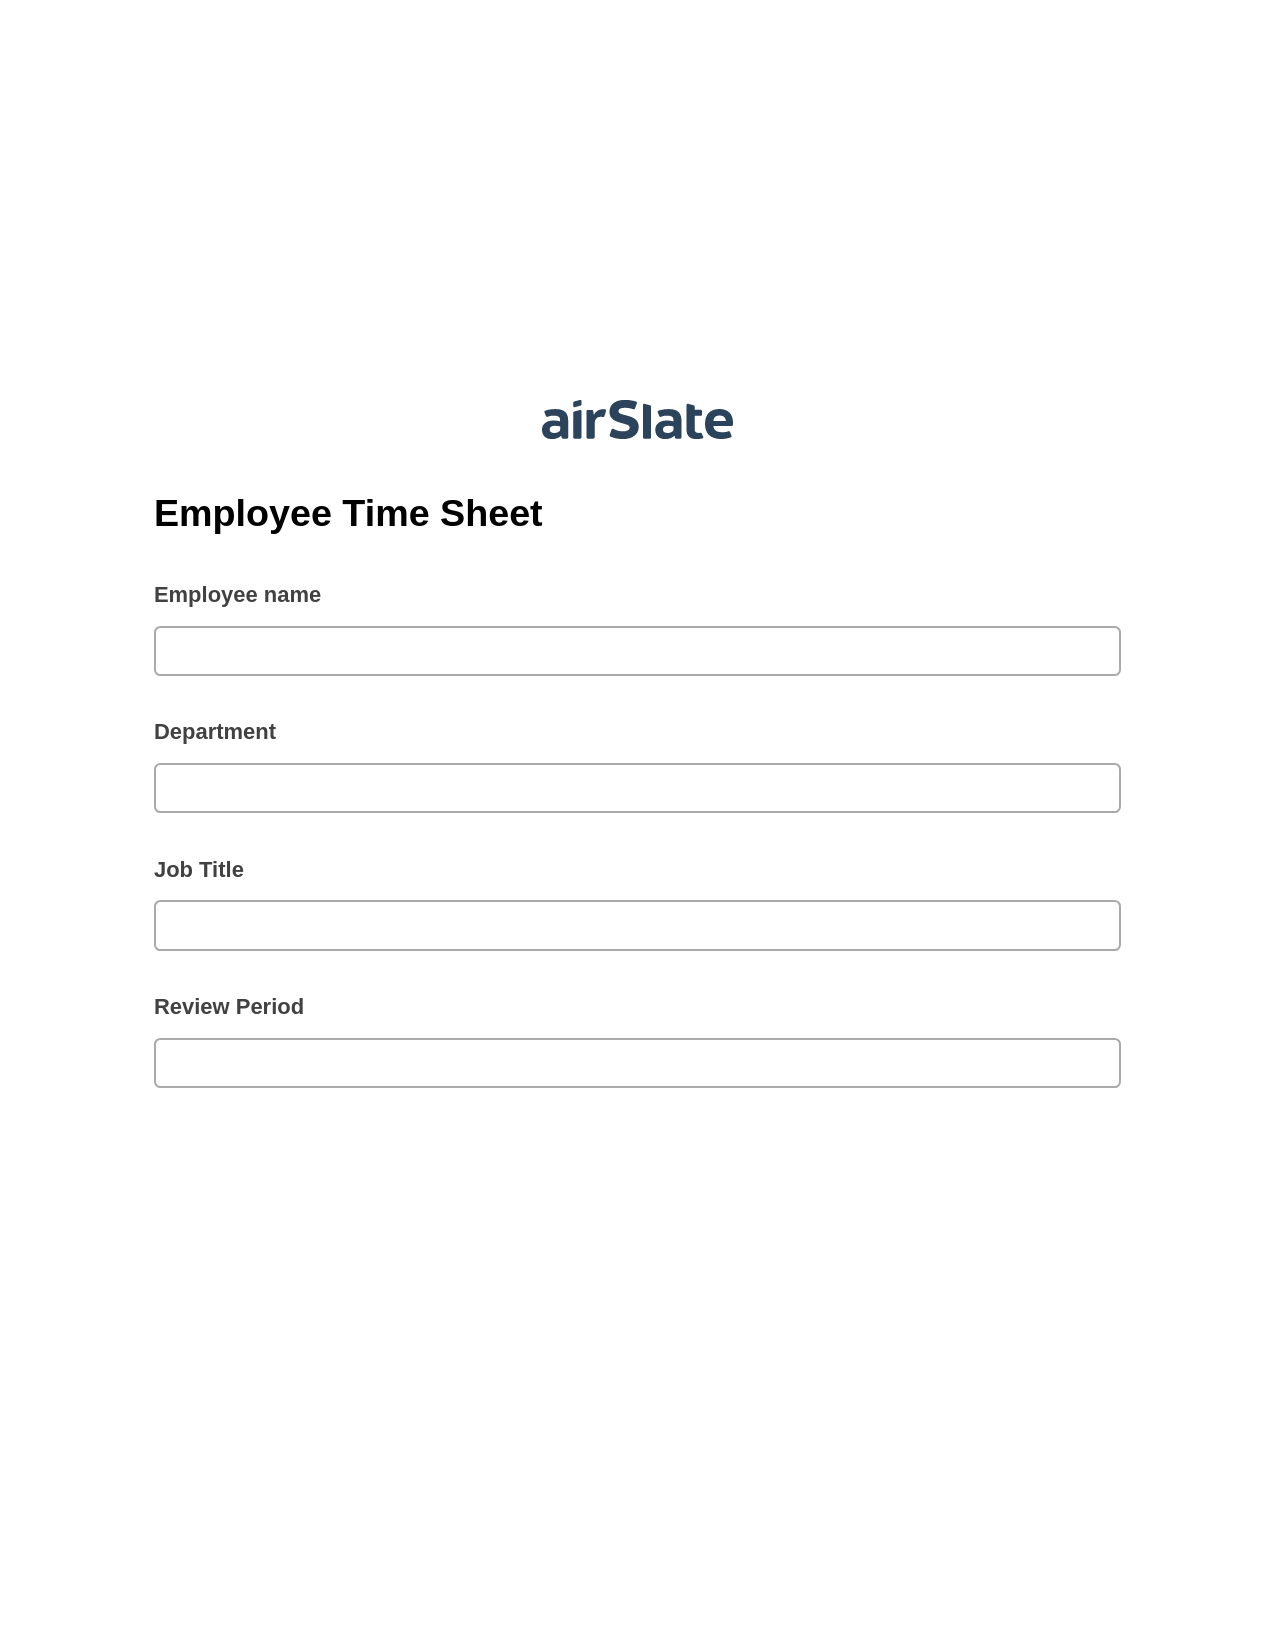 Employee Time Sheet Pre-fill Dropdowns from CSV file Bot, Create Salesforce Records Bot, Archive to SharePoint Folder Bot